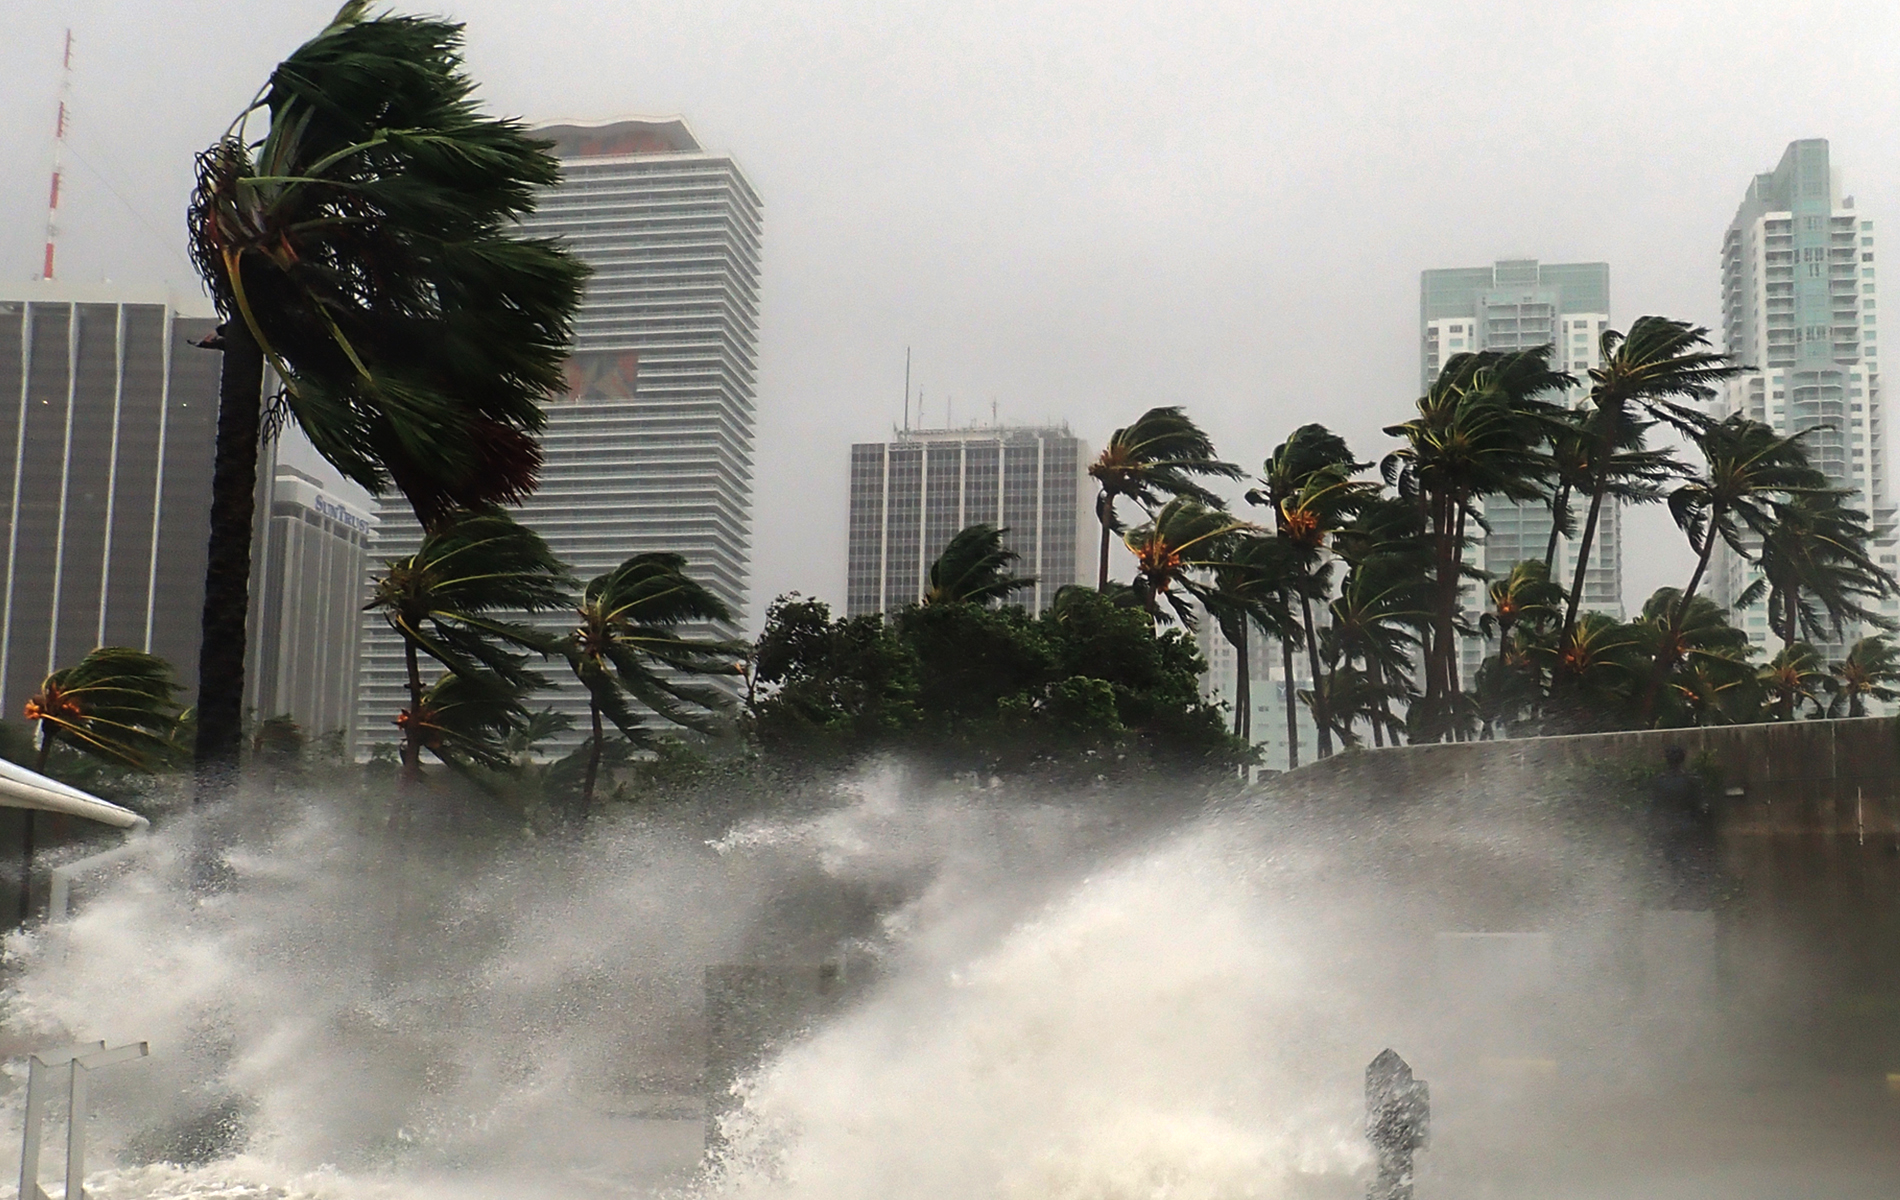 Hurricane impacts being felt along the Miami coastline. Waves crashing onshore, palm trees blowing in high winds.